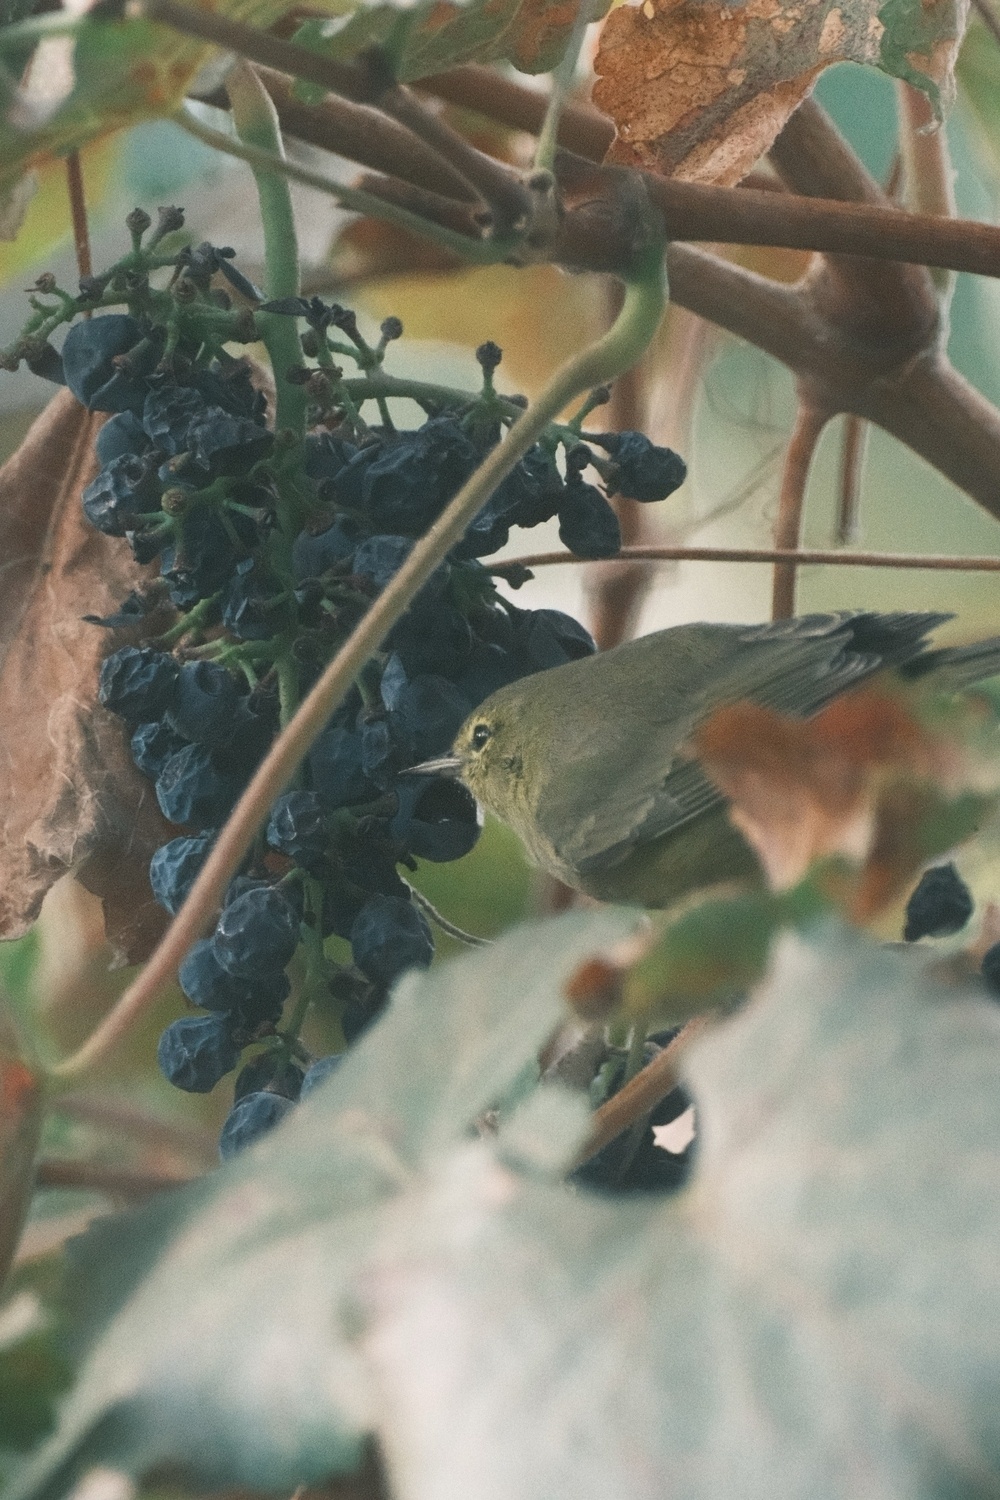 An Orange-crowned Warbler, perched in a grapevine, feasts on a bunch of drying out grapes. The bird is slightly obscured by a grape leaf. The warbler is a brownish yellow with white around its eyes.